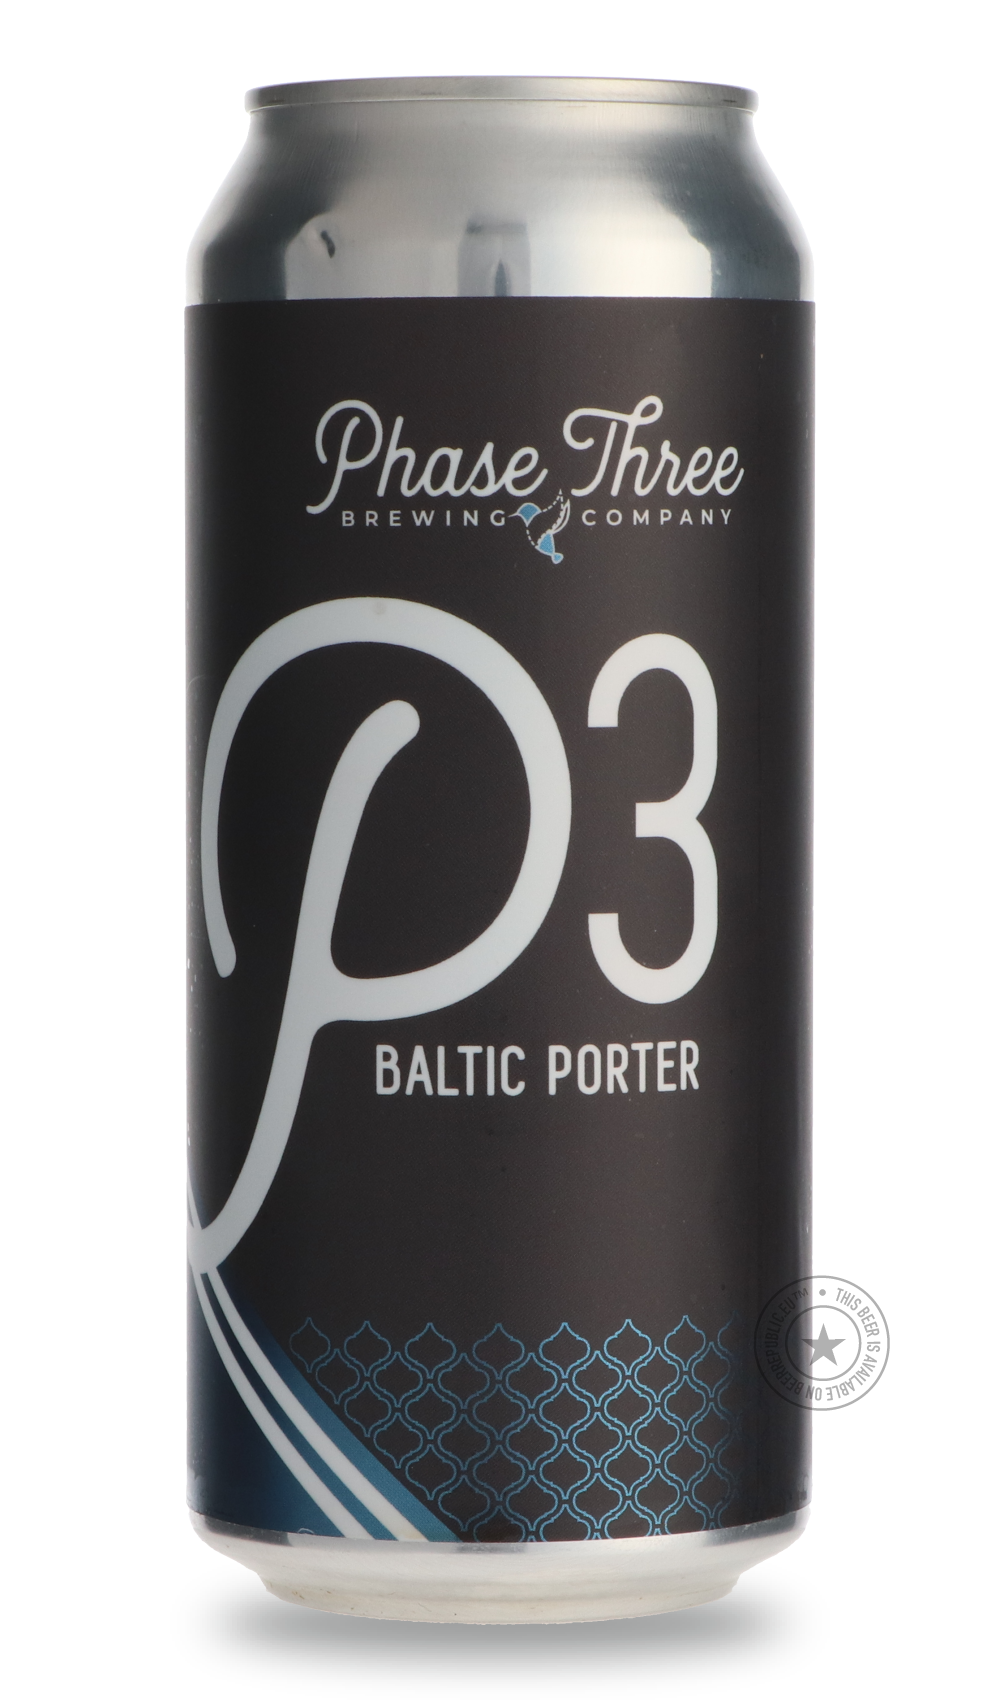 -Phase Three- P3 Baltic Porter-Stout & Porter- Only @ Beer Republic - The best online beer store for American & Canadian craft beer - Buy beer online from the USA and Canada - Bier online kopen - Amerikaans bier kopen - Craft beer store - Craft beer kopen - Amerikanisch bier kaufen - Bier online kaufen - Acheter biere online - IPA - Stout - Porter - New England IPA - Hazy IPA - Imperial Stout - Barrel Aged - Barrel Aged Imperial Stout - Brown - Dark beer - Blond - Blonde - Pilsner - Lager - Wheat - Weizen -